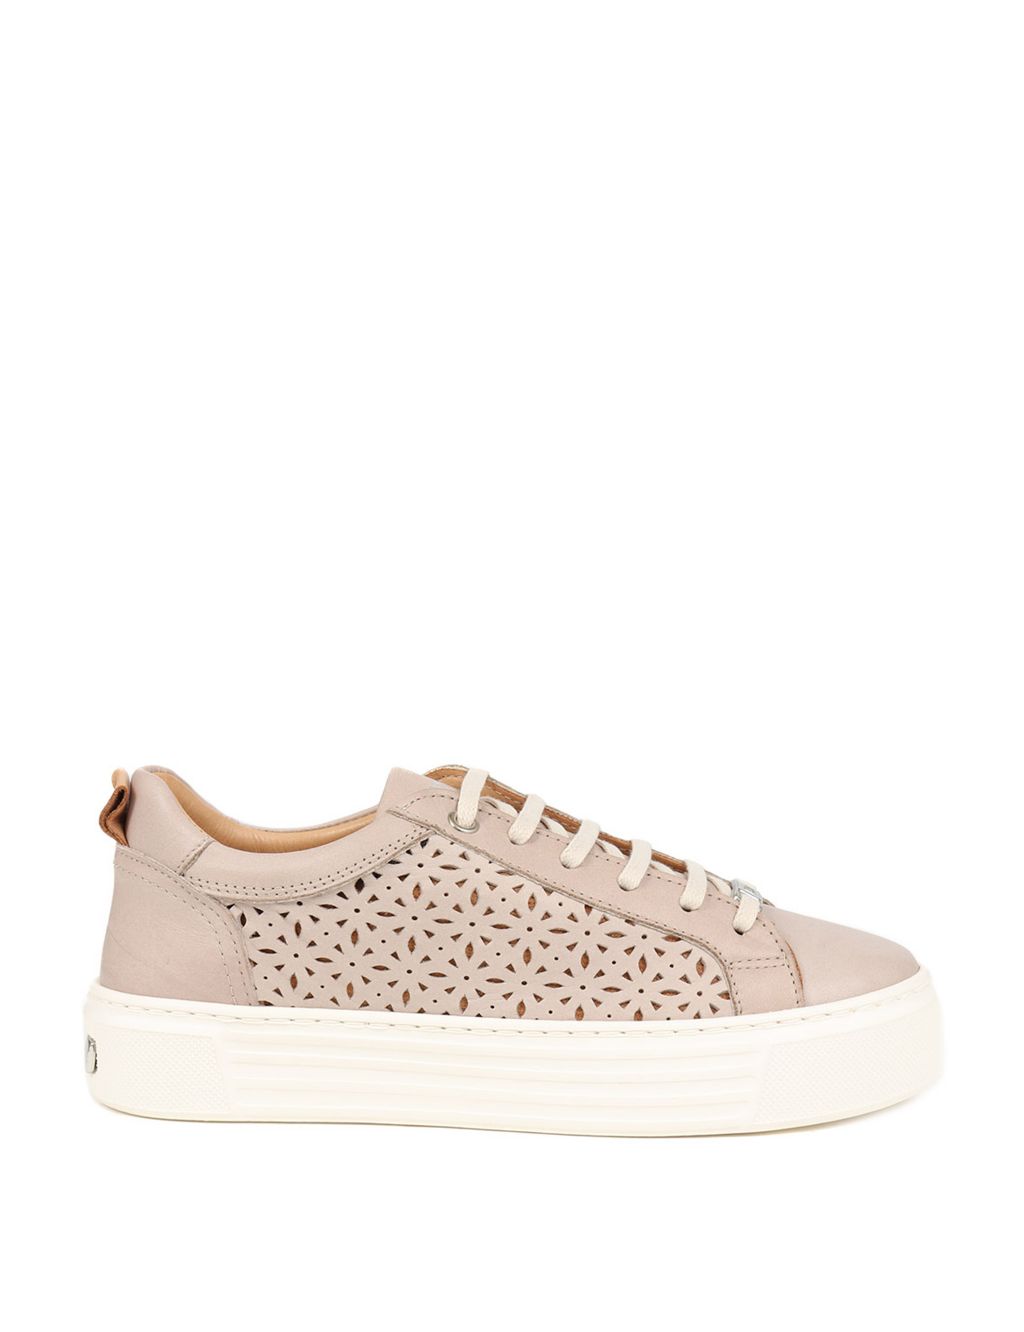 Leather Lace Up Perforated Flatform Trainers image 2